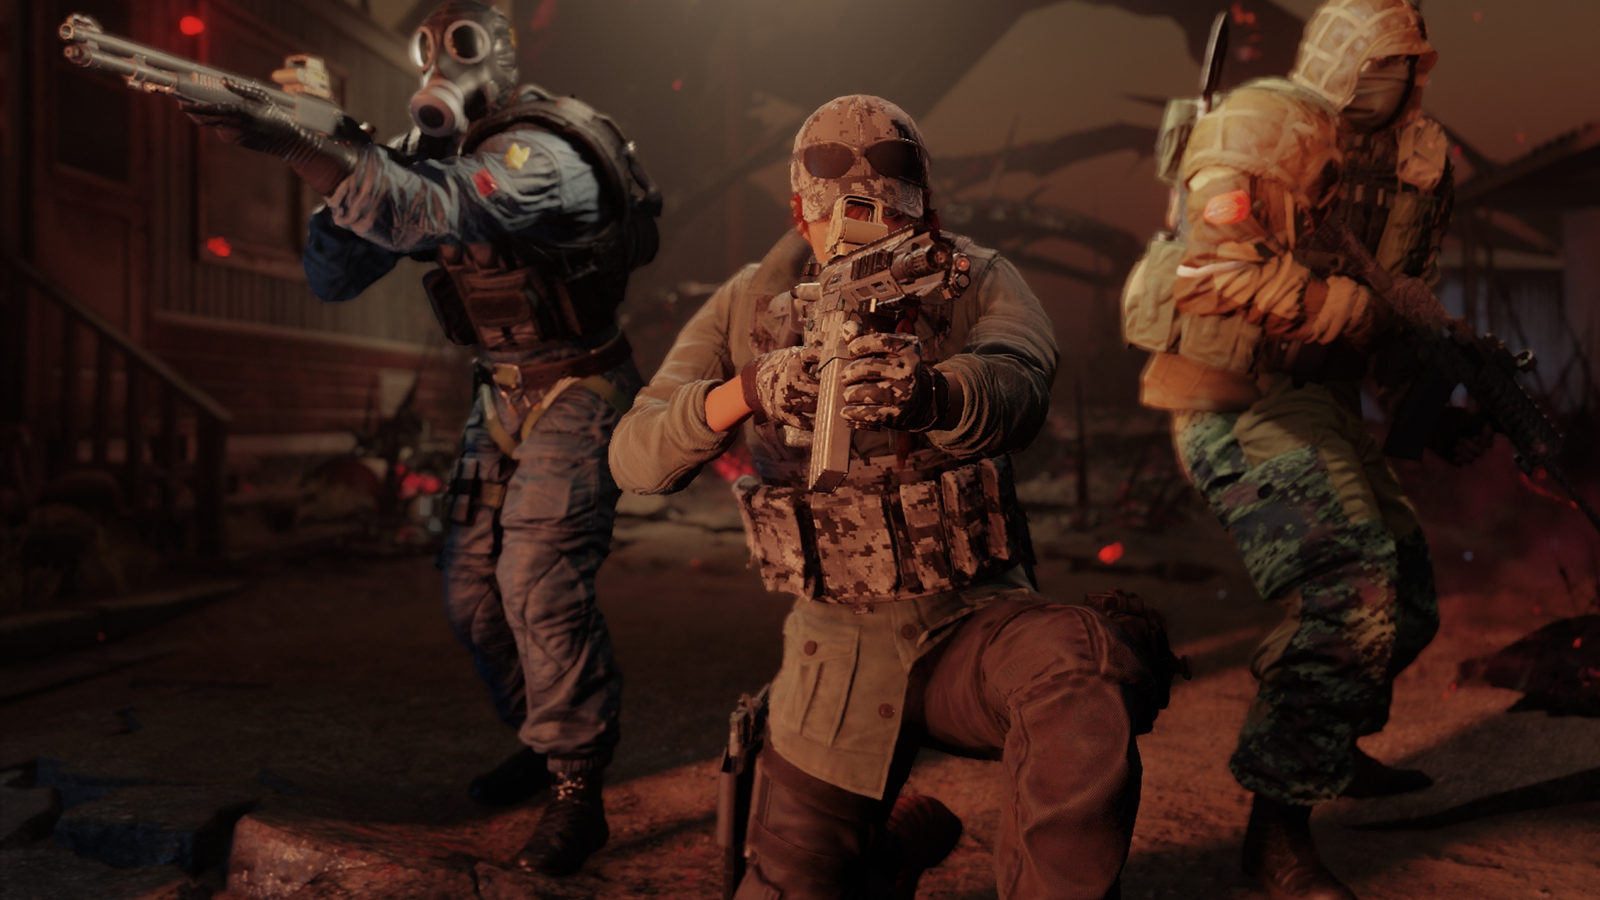 Rainbow Six Mobile delivers tactical goodness in a bite-sized